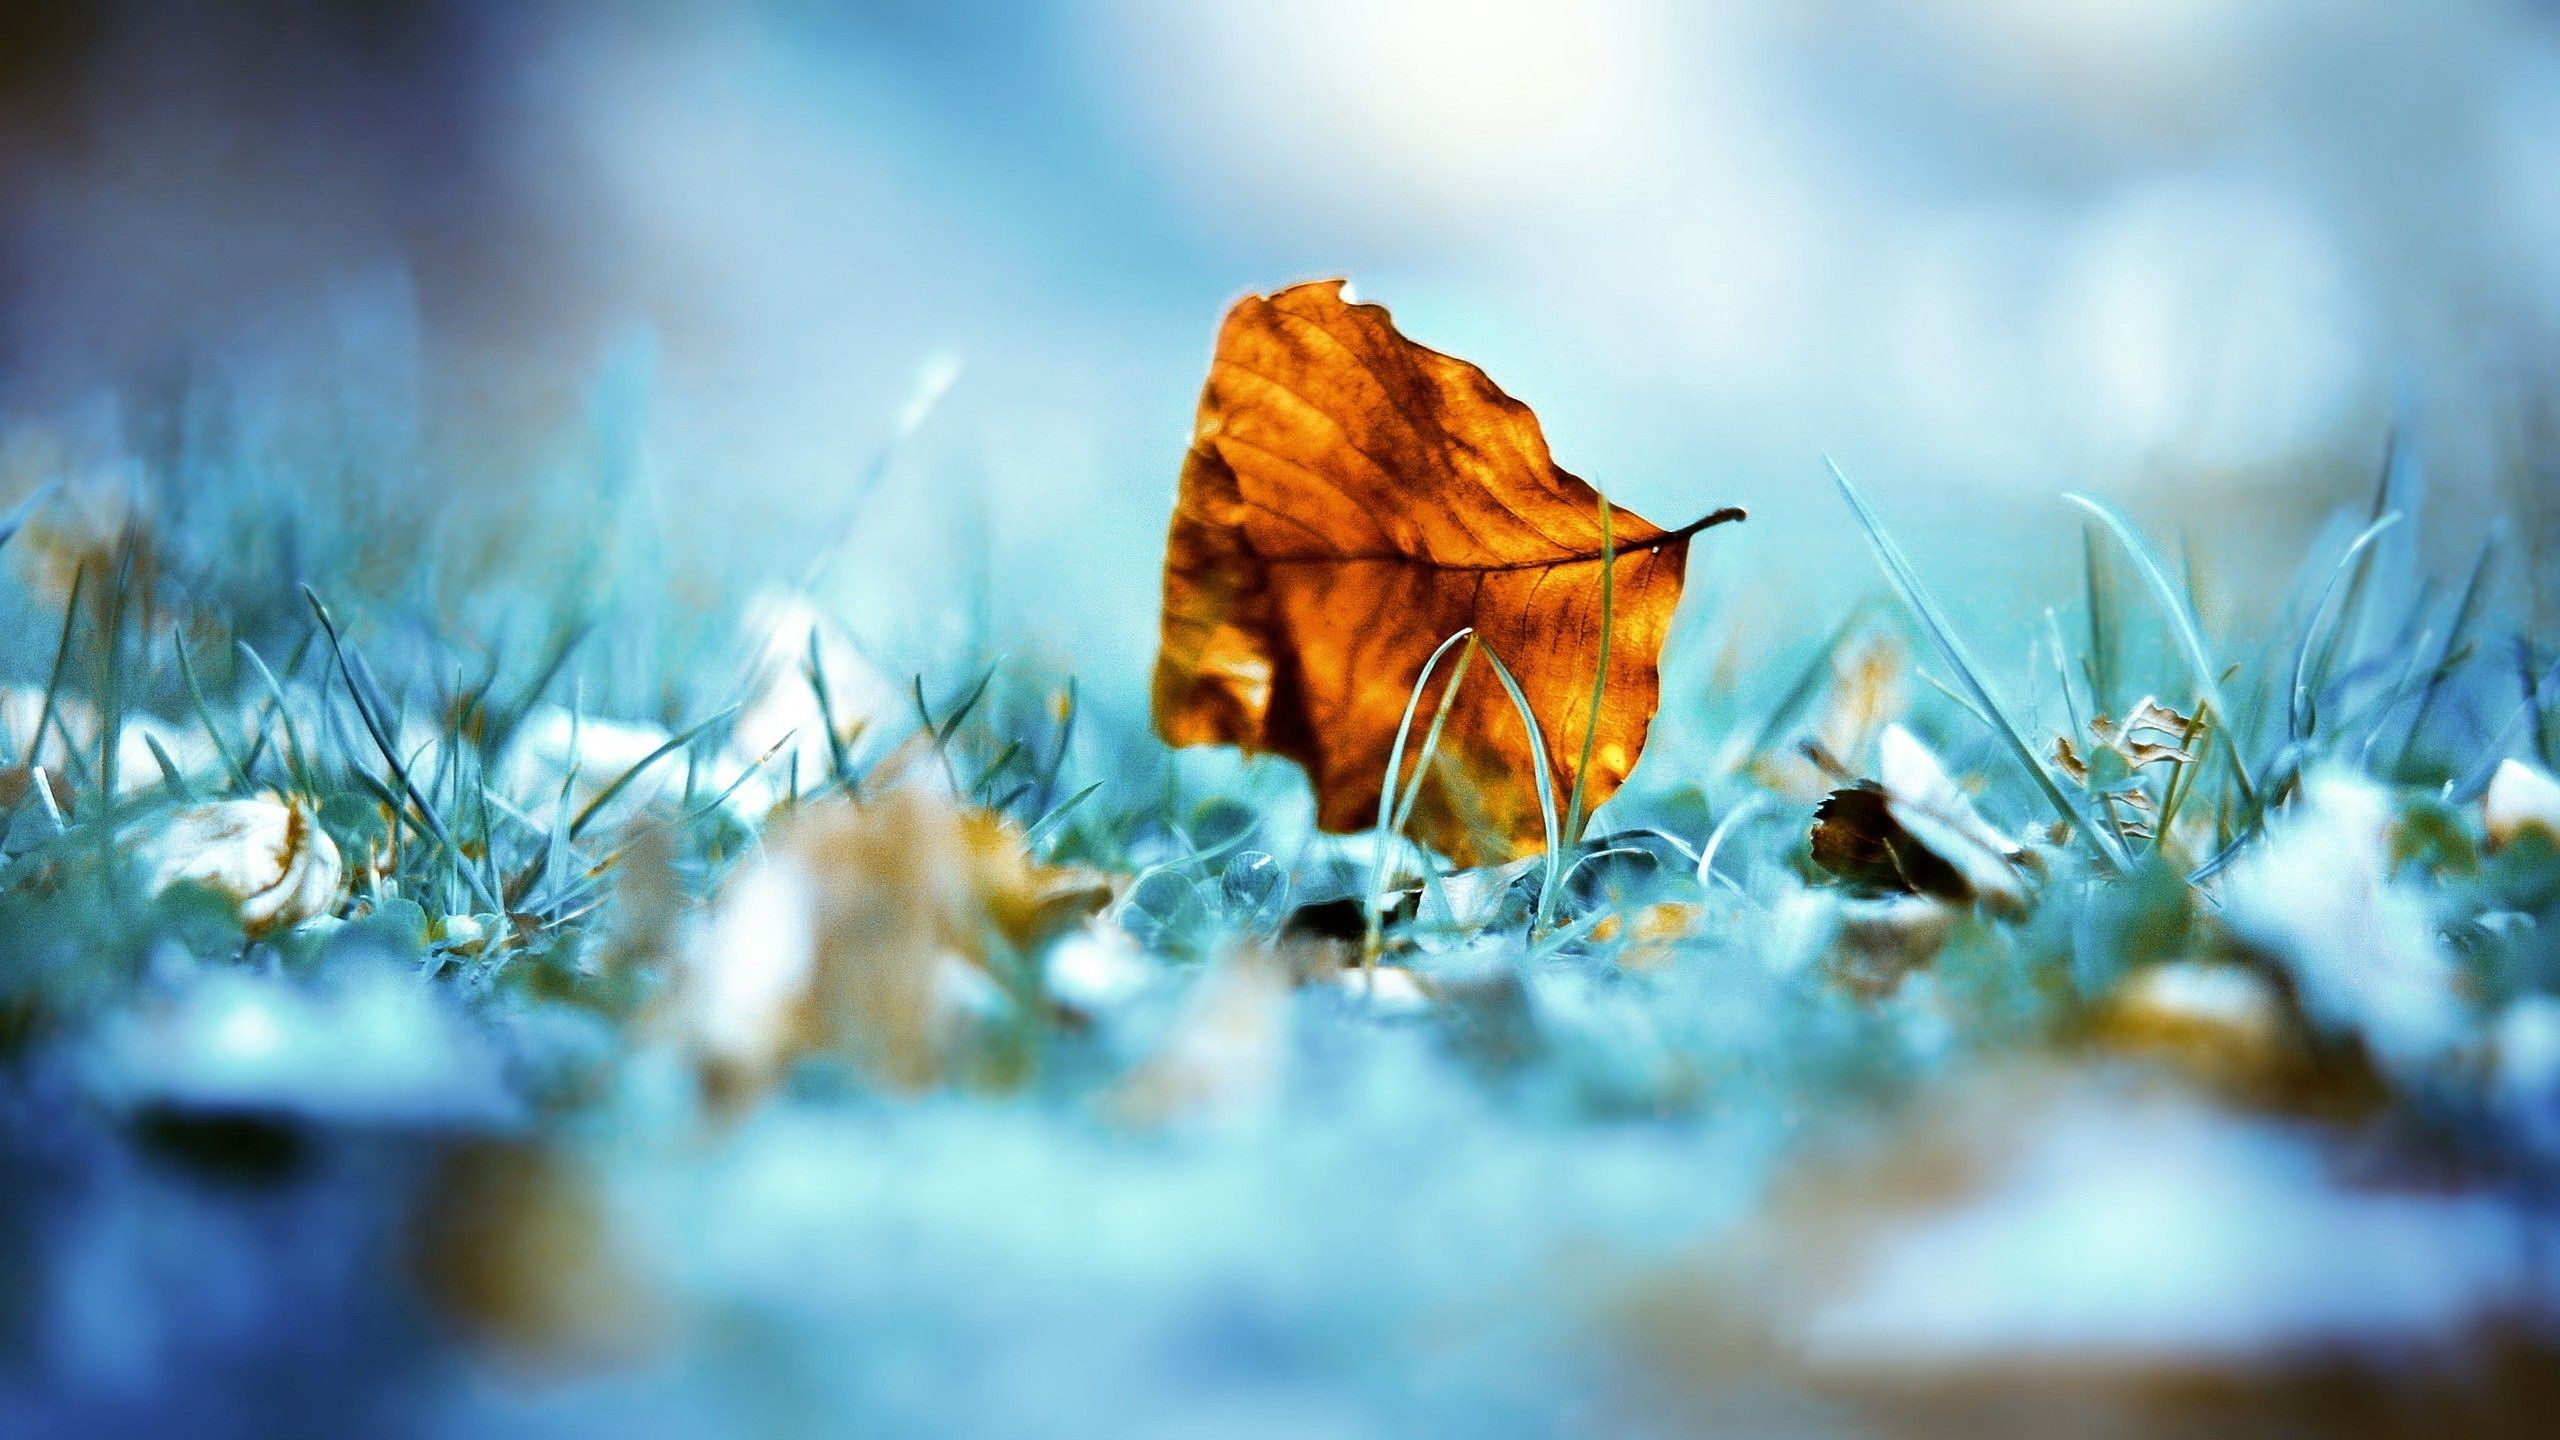 2560x1440 Nature Leaves Unique Photography Wallpaper HD Free Download #78922988839  Wallpaper